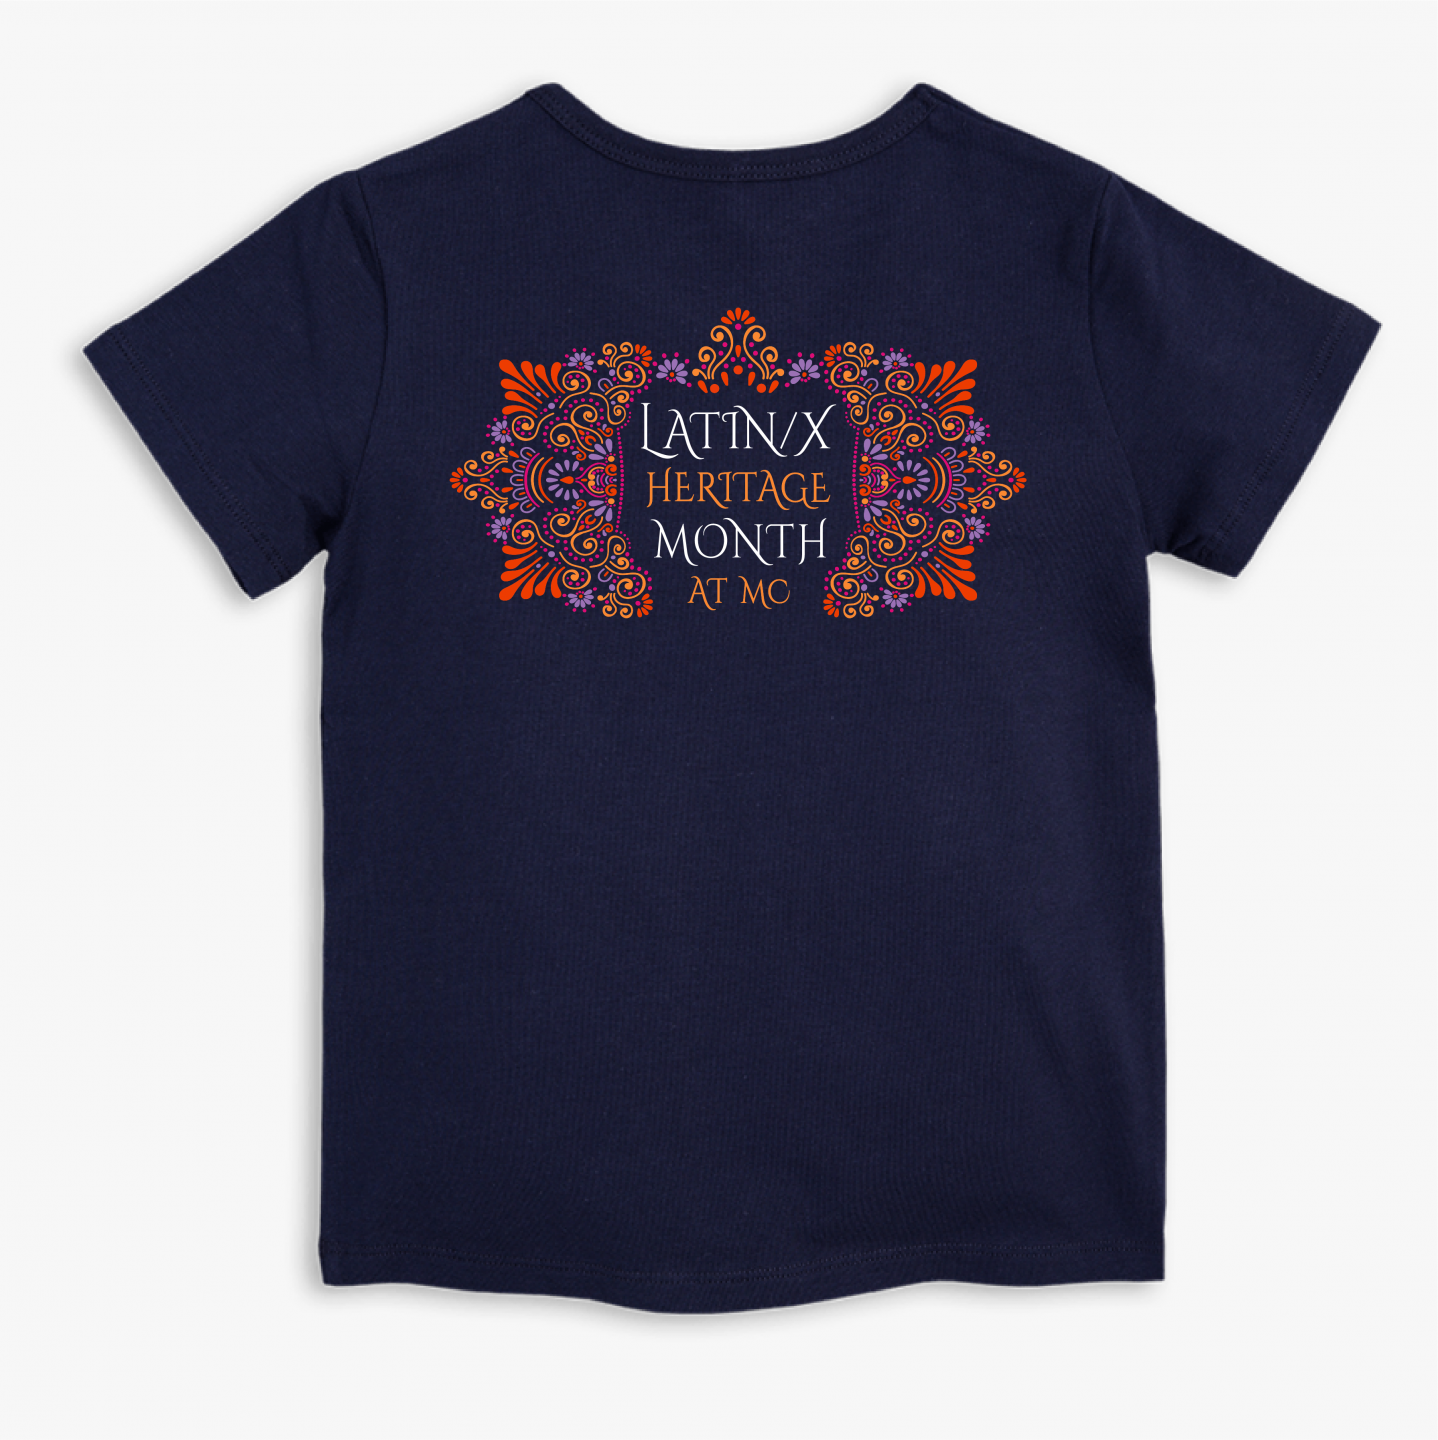 blue teeshirt with latinx logo in vibrant colors